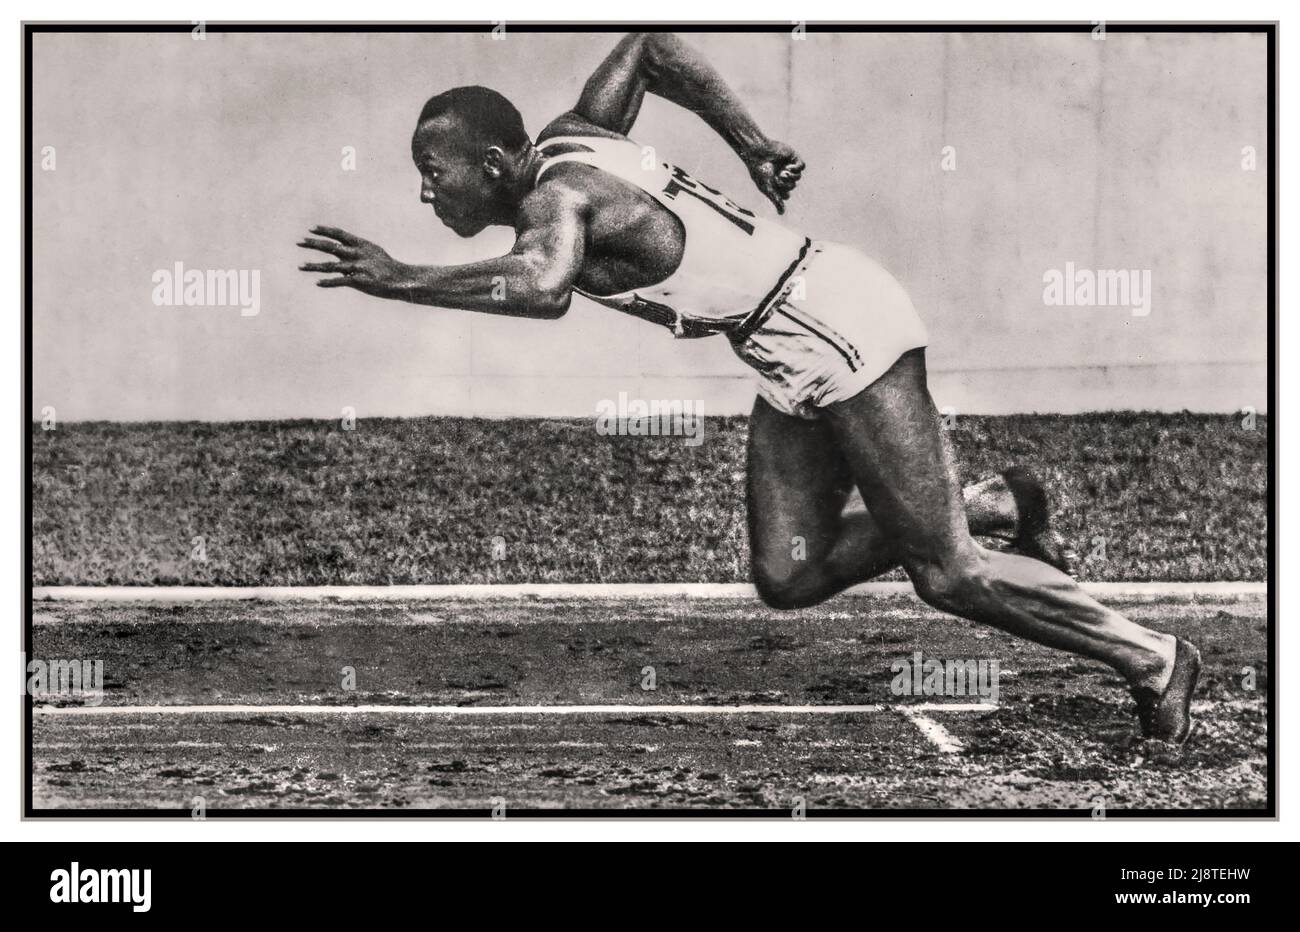 Jesse Owens at the 1936 Olympics Nazi Germany He achieved international fame at the 1936 Summer Olympics in Berlin, Germany, by winning four gold medals: 100 meters, long jump, 200 meters, and 4 × 100-meter relay. He was the most successful athlete at the Games and, as a black American man, was credited with 'single-handedly crushing Hitler's myth of Aryan supremacy'. Official Olympics postcard, Reichssportverlag, Berlin winner of four gold medals, Berlin Nazi Germany. Stock Photo